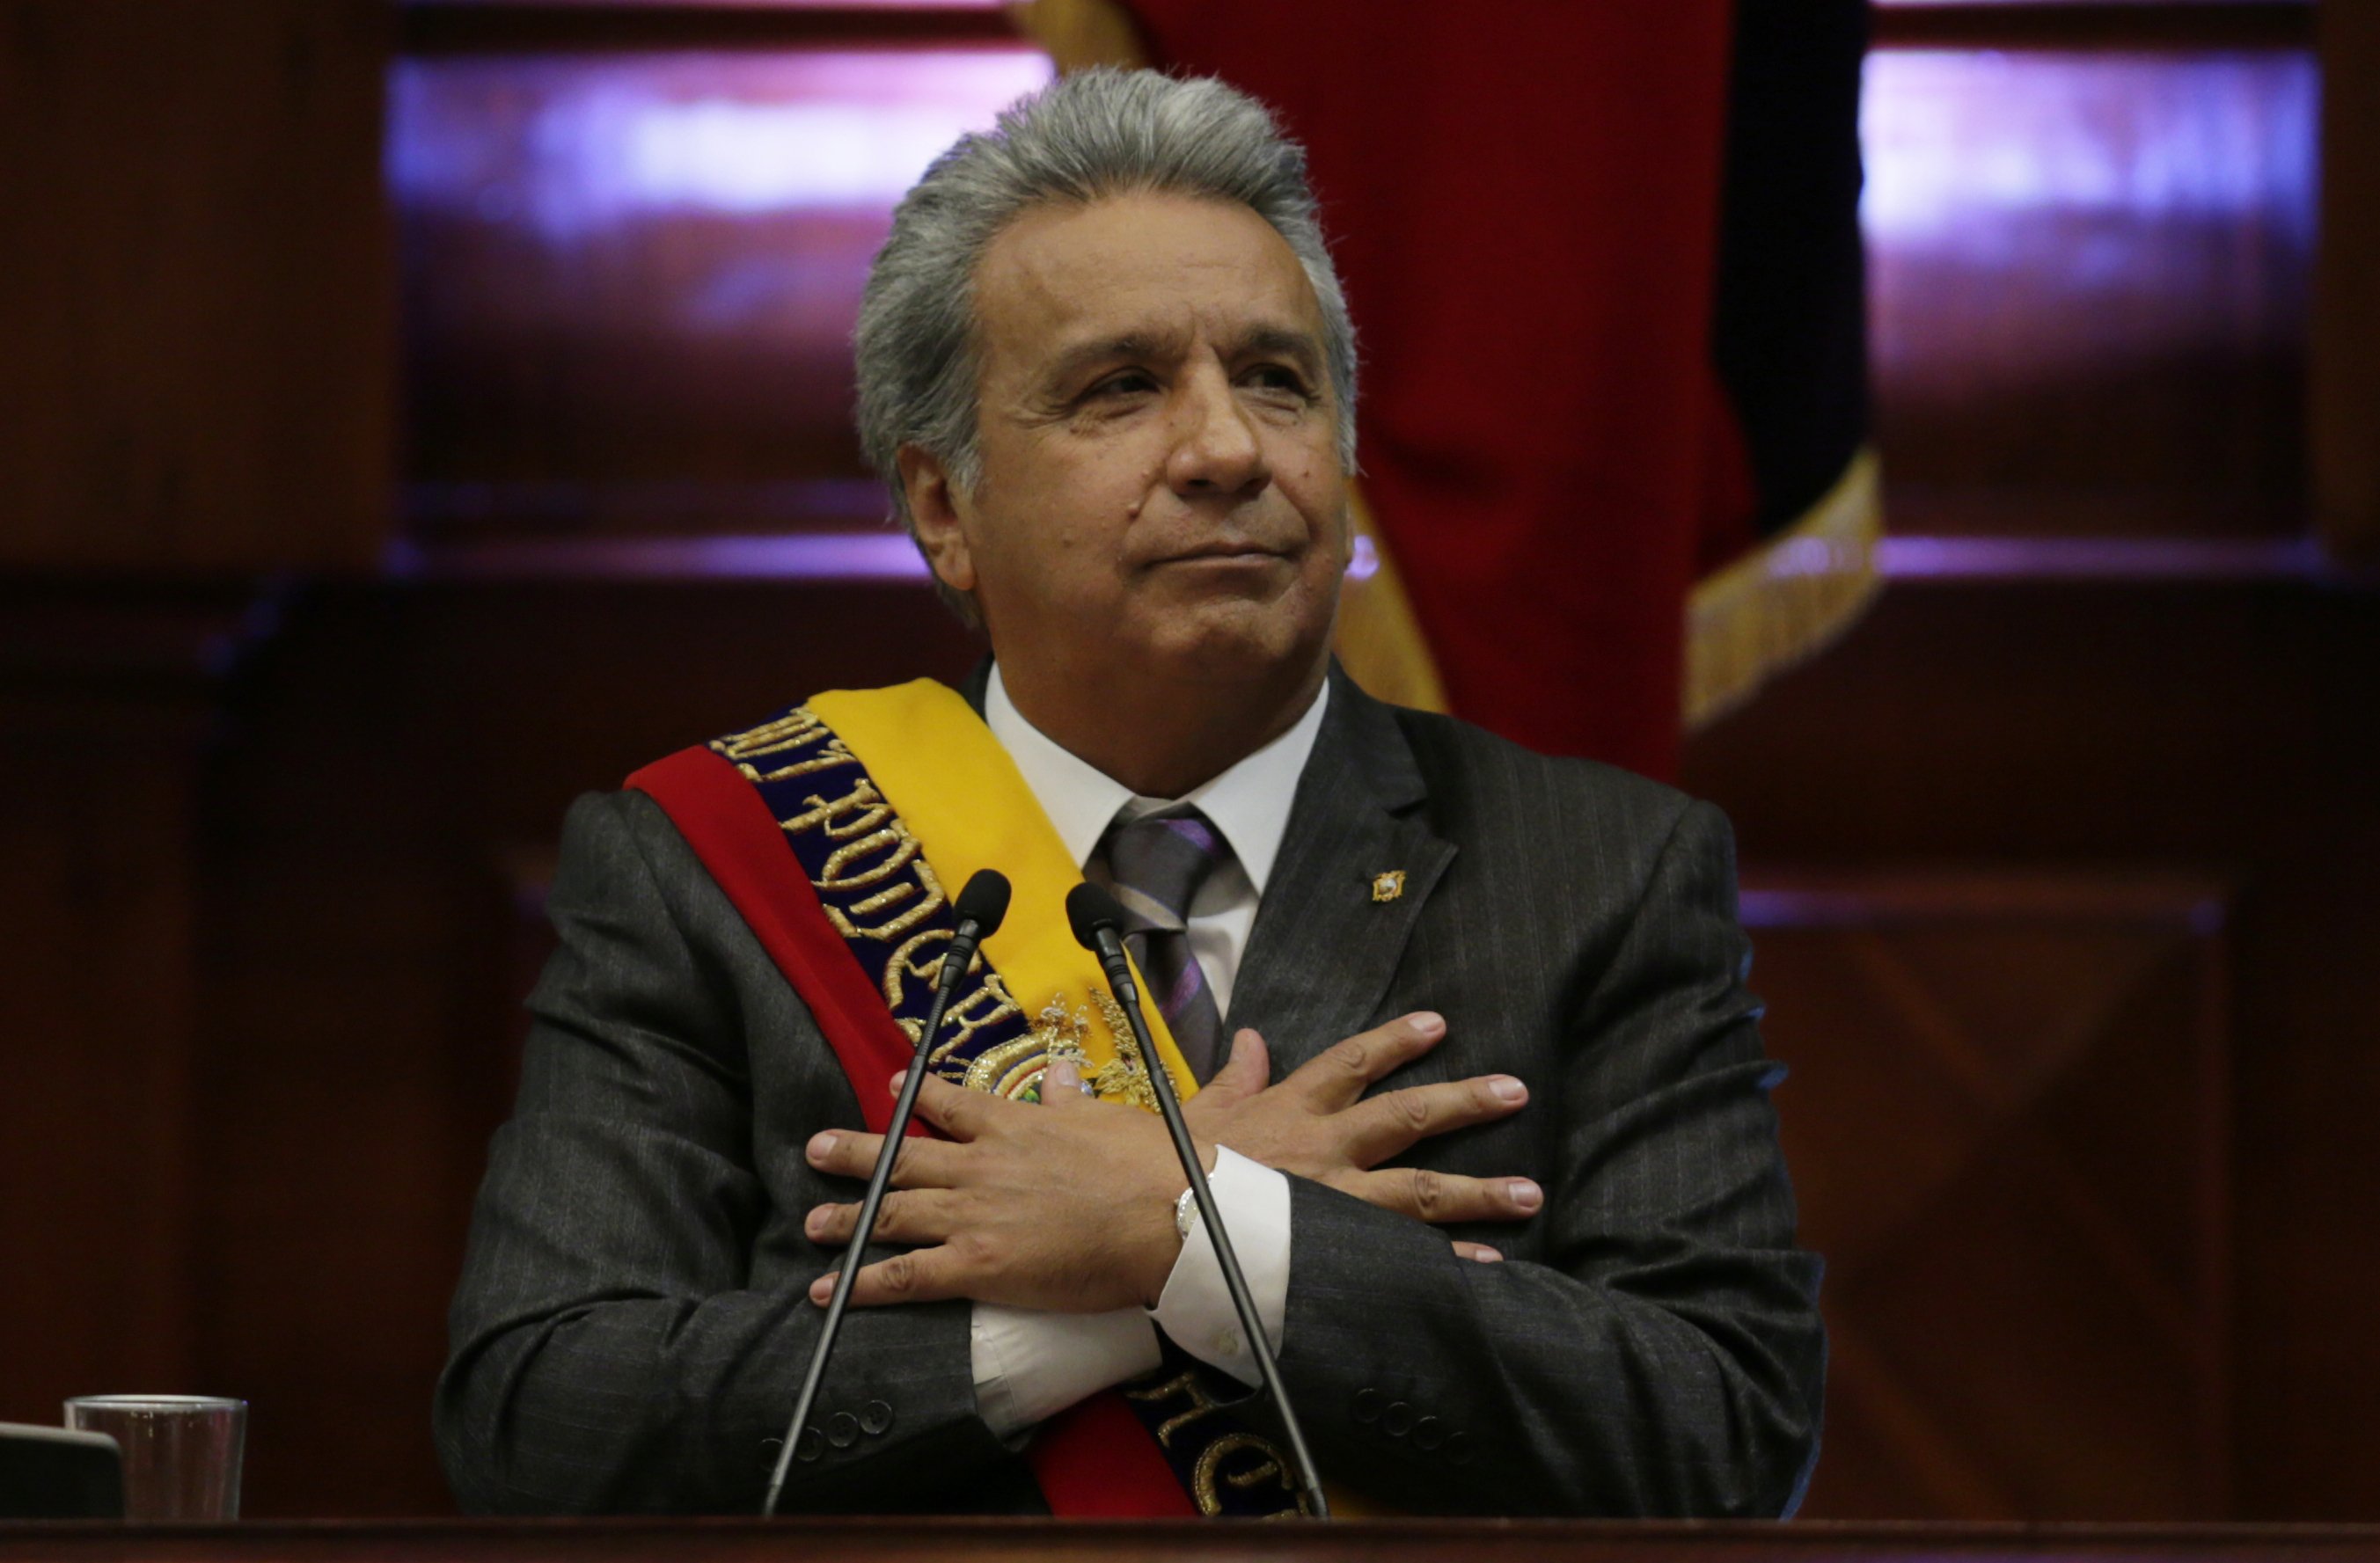 Ecuador's President Lenin Moreno delivers his first, annual state-of-the-nation address inside the National Assembly in Quito, Ecuador, Thursday, May 24, 2018. The first year of Moreno's administration has been marked by the ongoing political feud with his predecessor Rafael Correa. (AP Photo/Dolores Ochoa)